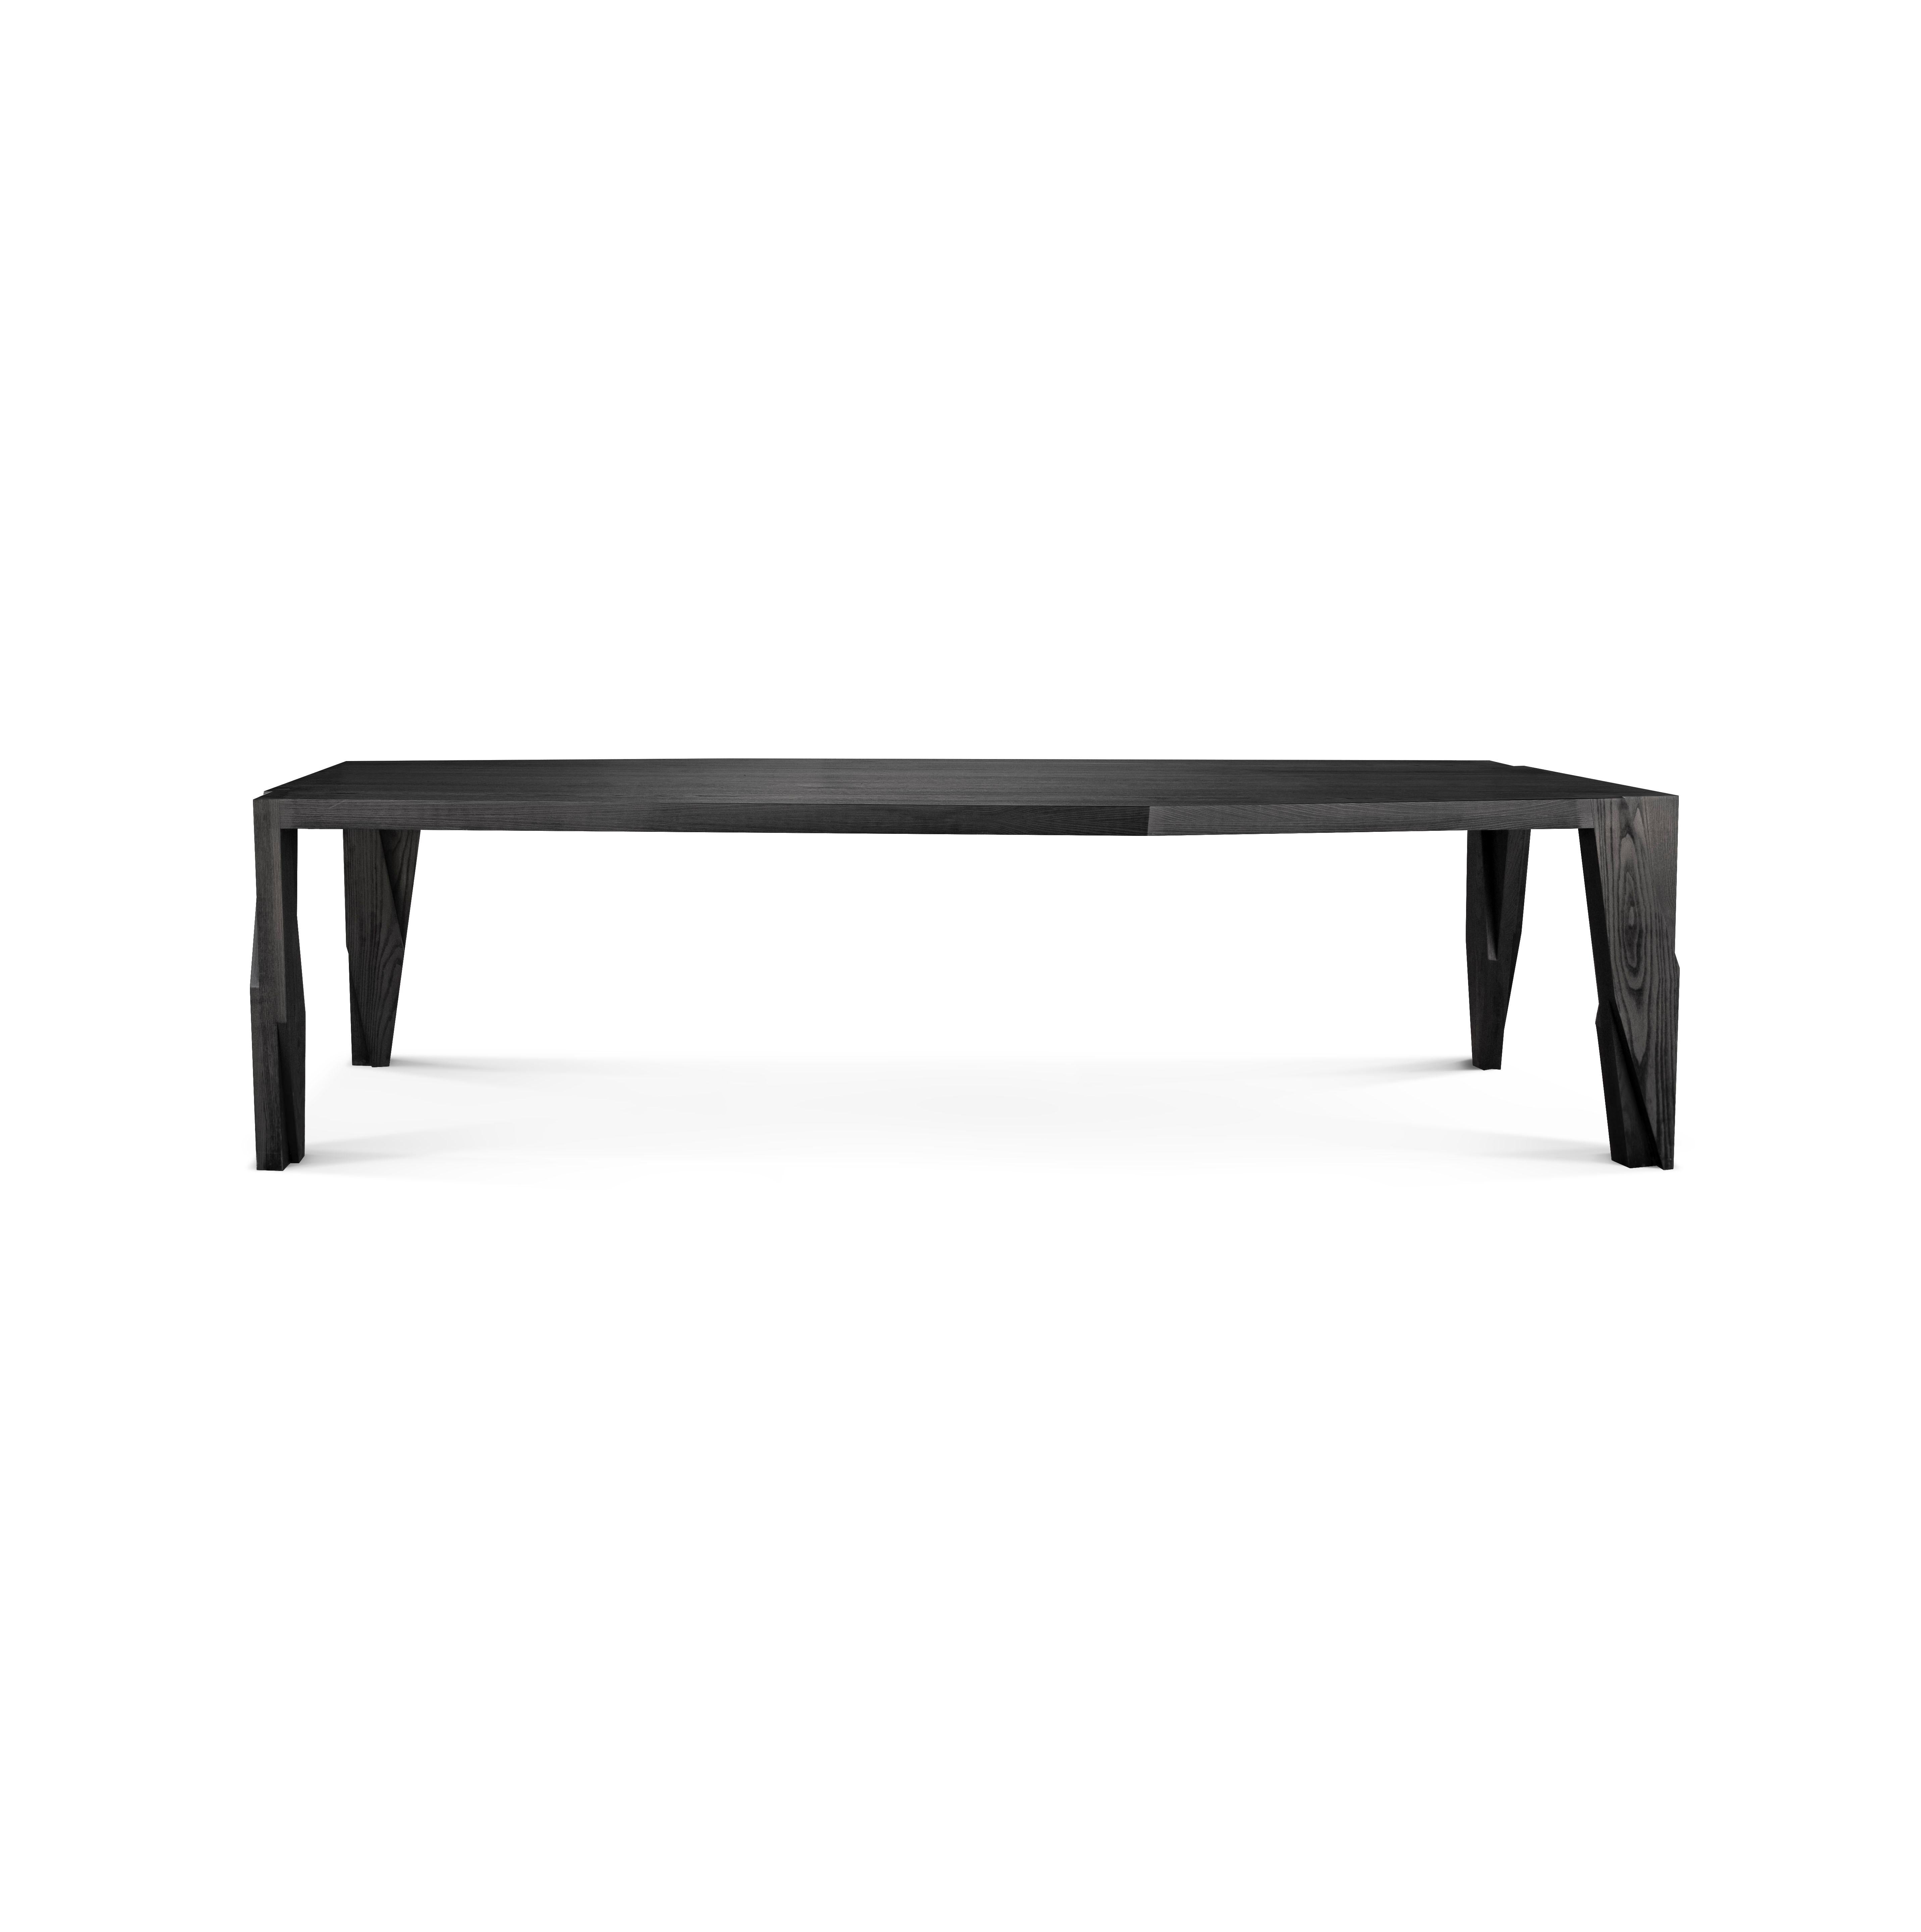 Contemporary Black Wooden 6 Seater Dining Table, Moramour by Adam Court for Okha

Design: Adam Court

Material: Ash / Oak (+ 1640 EUR) / Walnut (+ 7320 EUR)

Dimensions:
2850W X 1100D X 760H mm
112.2W X 43.3D X 29.9H in

Handcrafted in